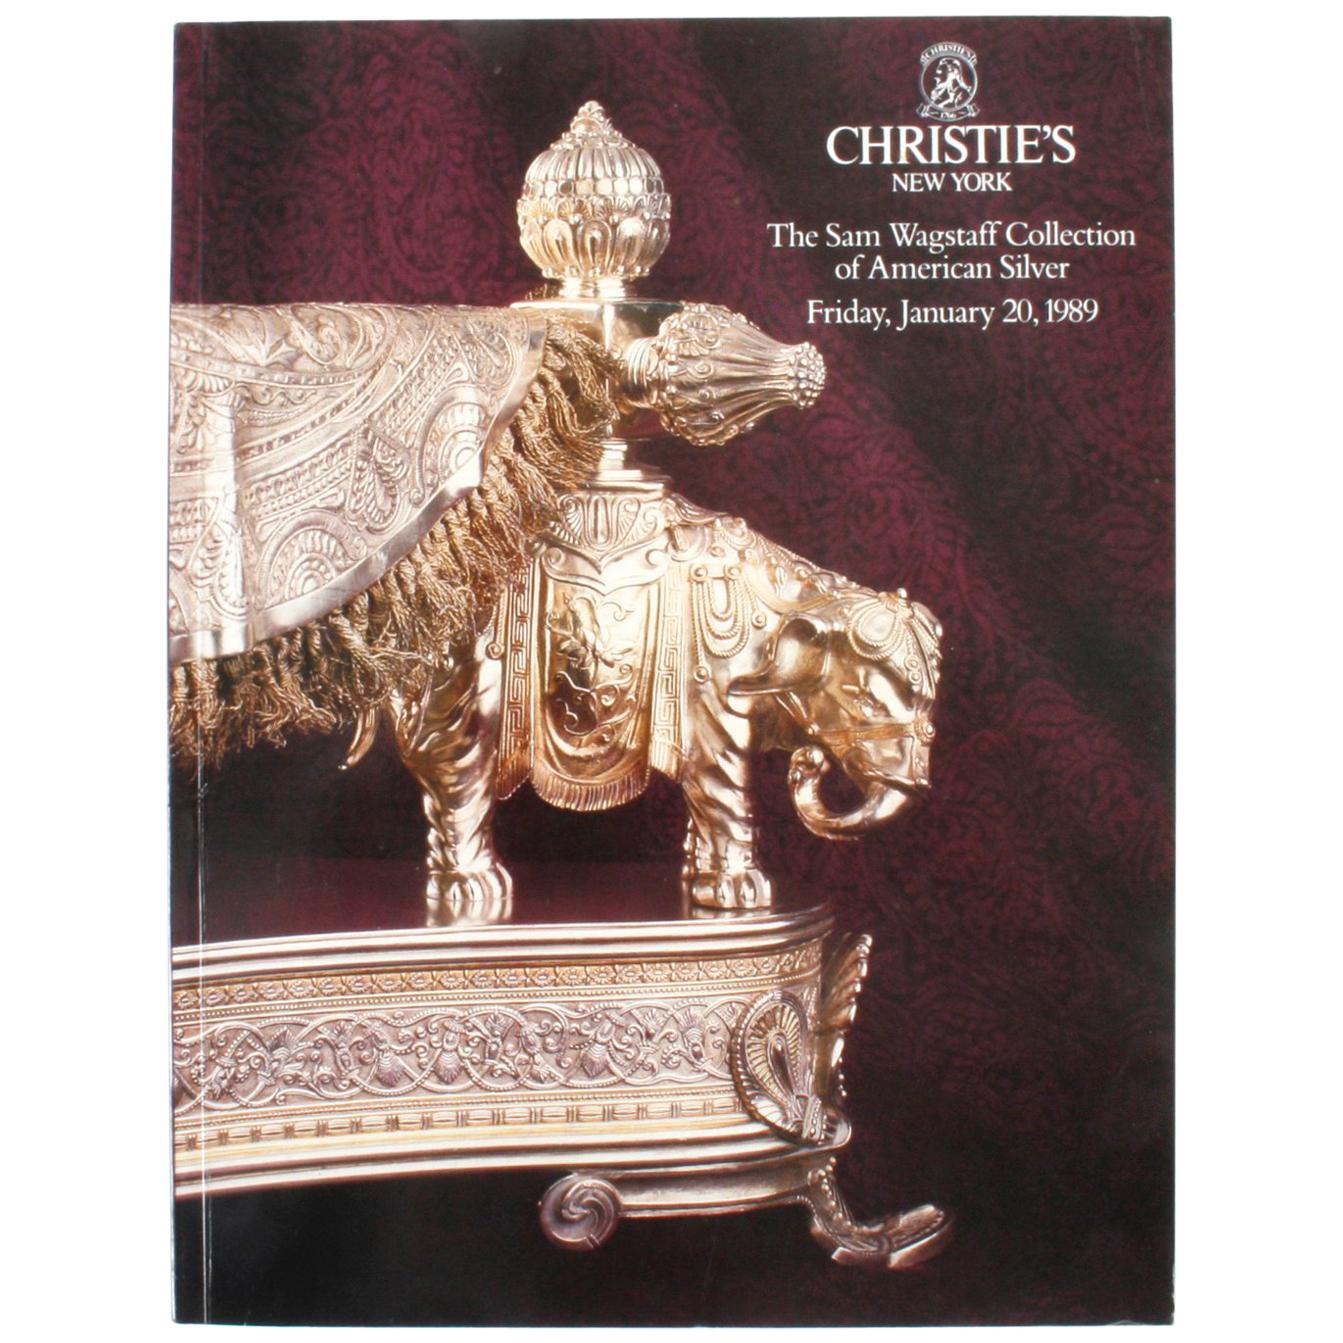 Christie's, The Sam Wagstaff Collection of American Silver, January 1989